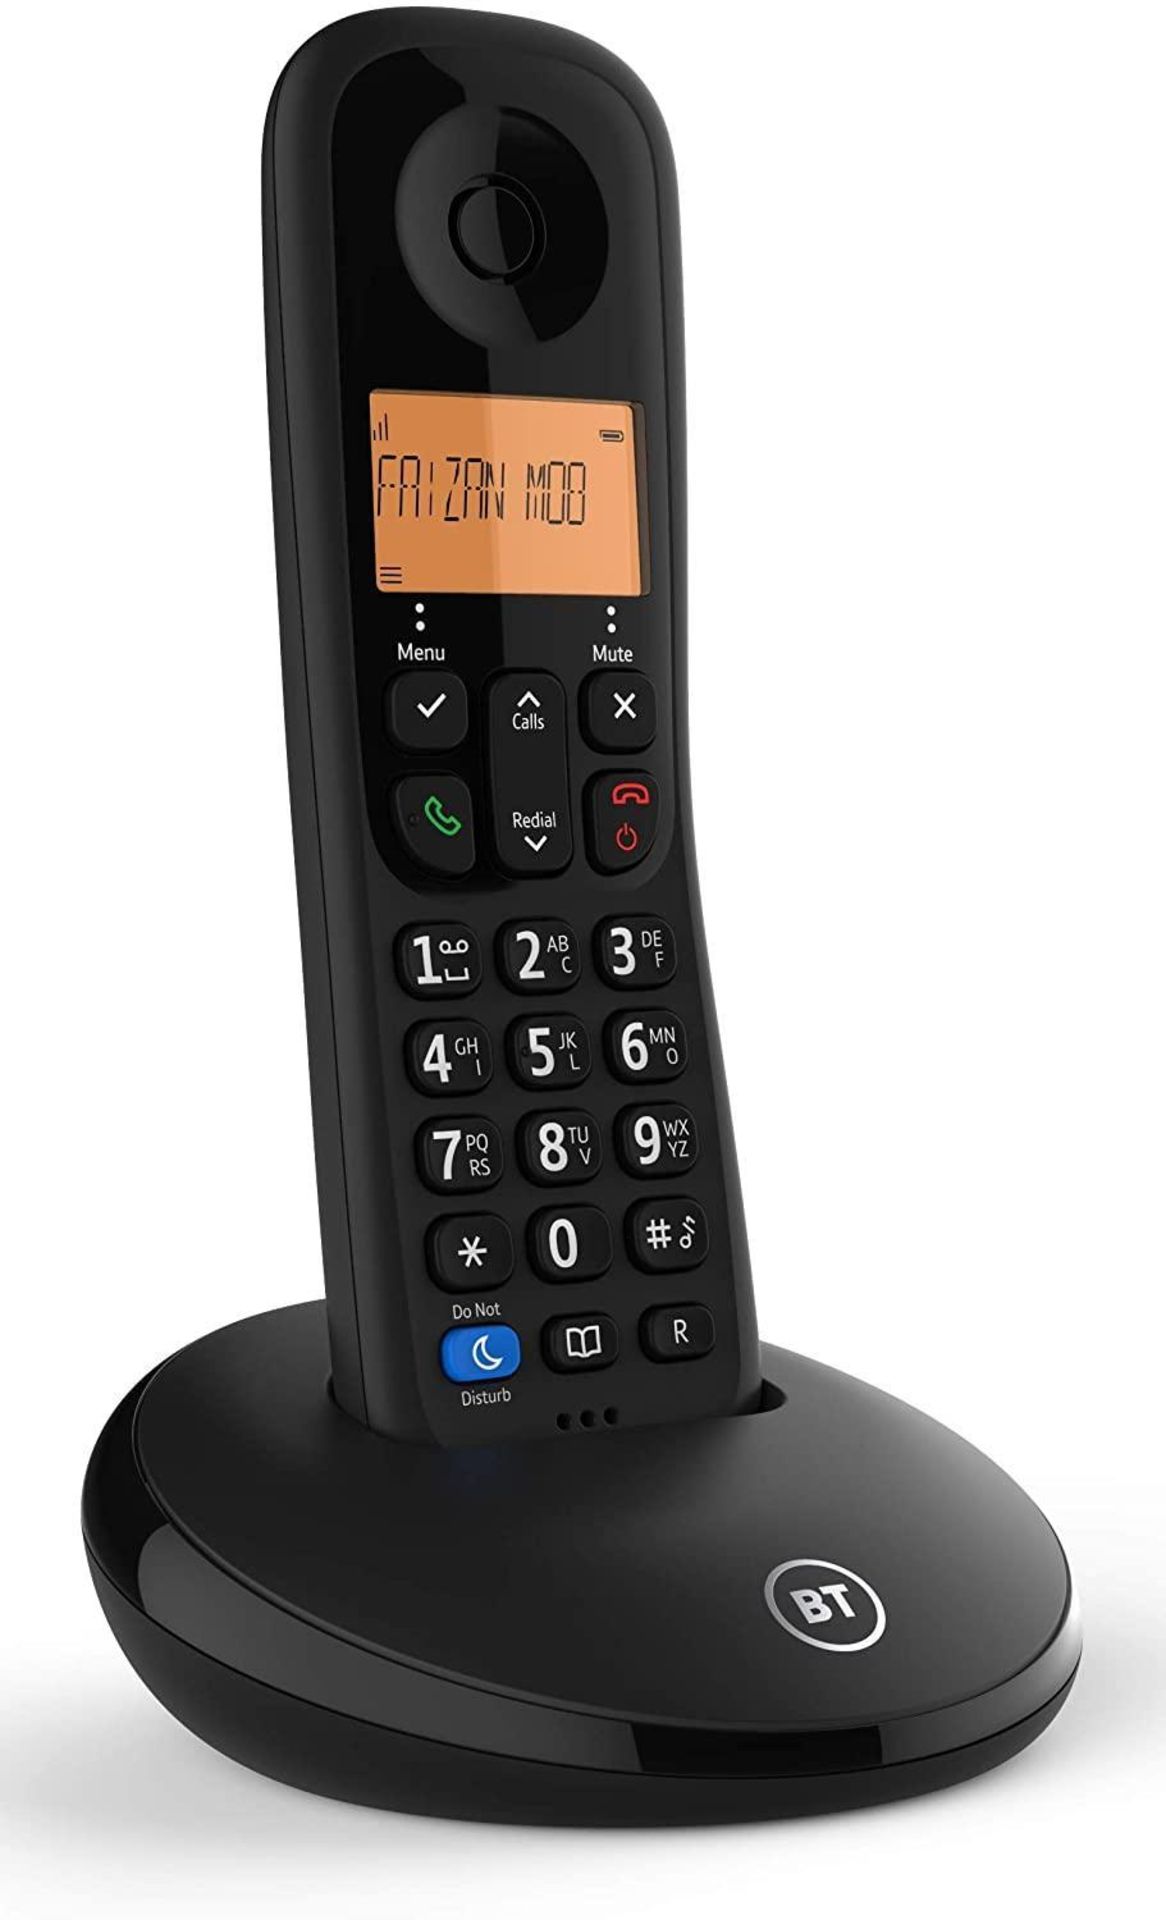 BT Everyday Cordless Home Phone with Basic Call Blocking, Single Handset Pack, Black £19.99 RRP